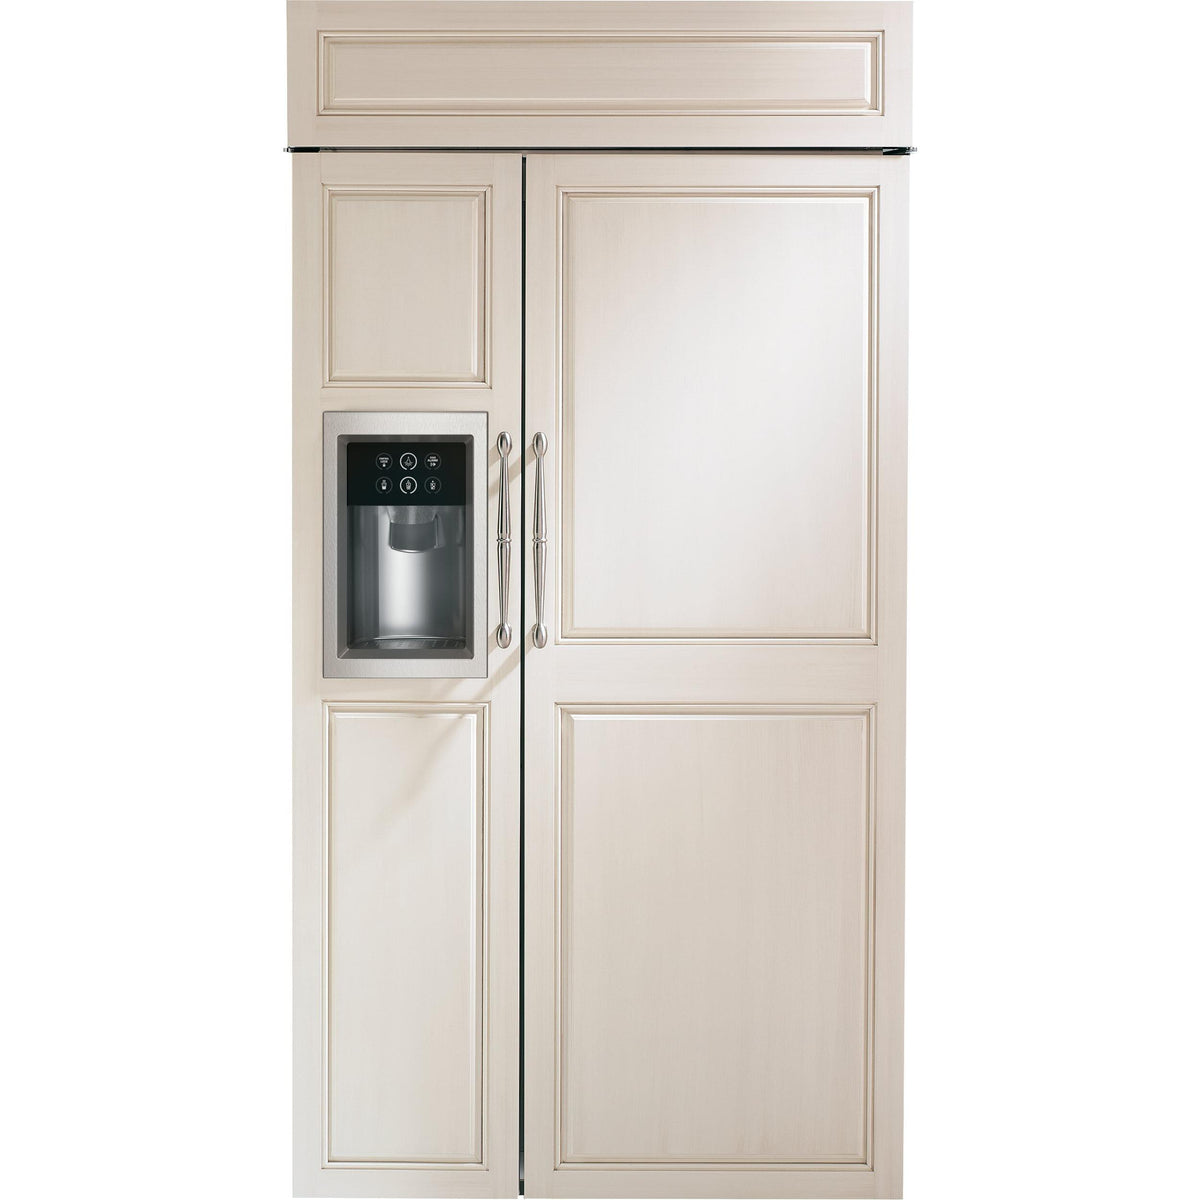 Monogram 42-inch, 24.6 cu.ft. Built-in Side-by-Side Refrigerator with External Water and Ice Dispenser ZISB420DNII IMAGE 1